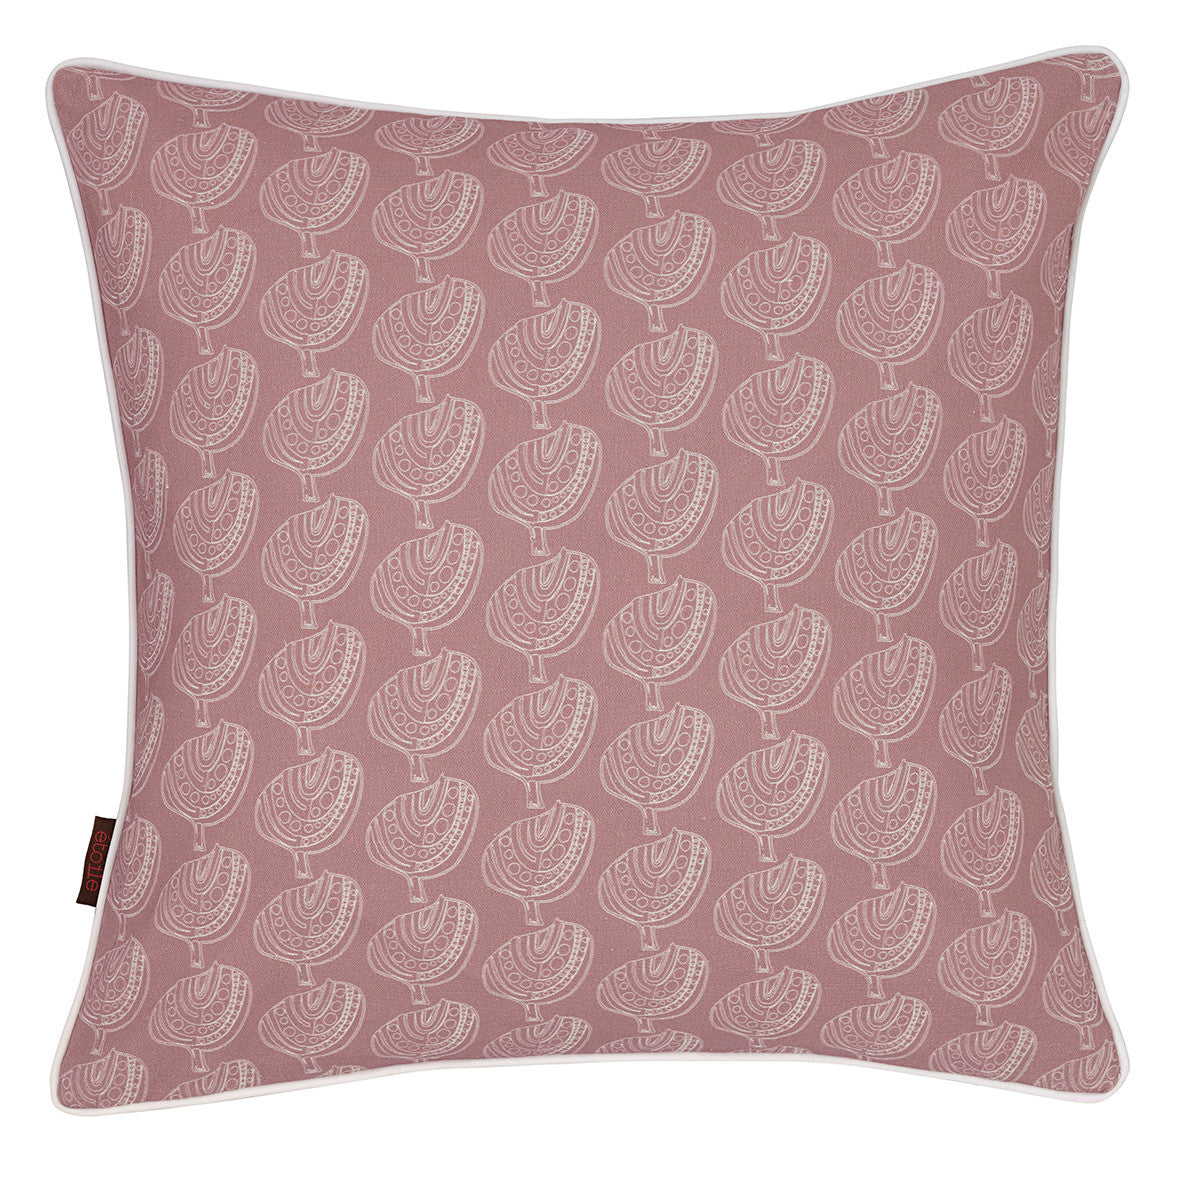 Graphic Apple Tree Pattern Printed Linen Union Decorative Throw Pillow in Light Heather Pink 45x45cm (18x18") Canada